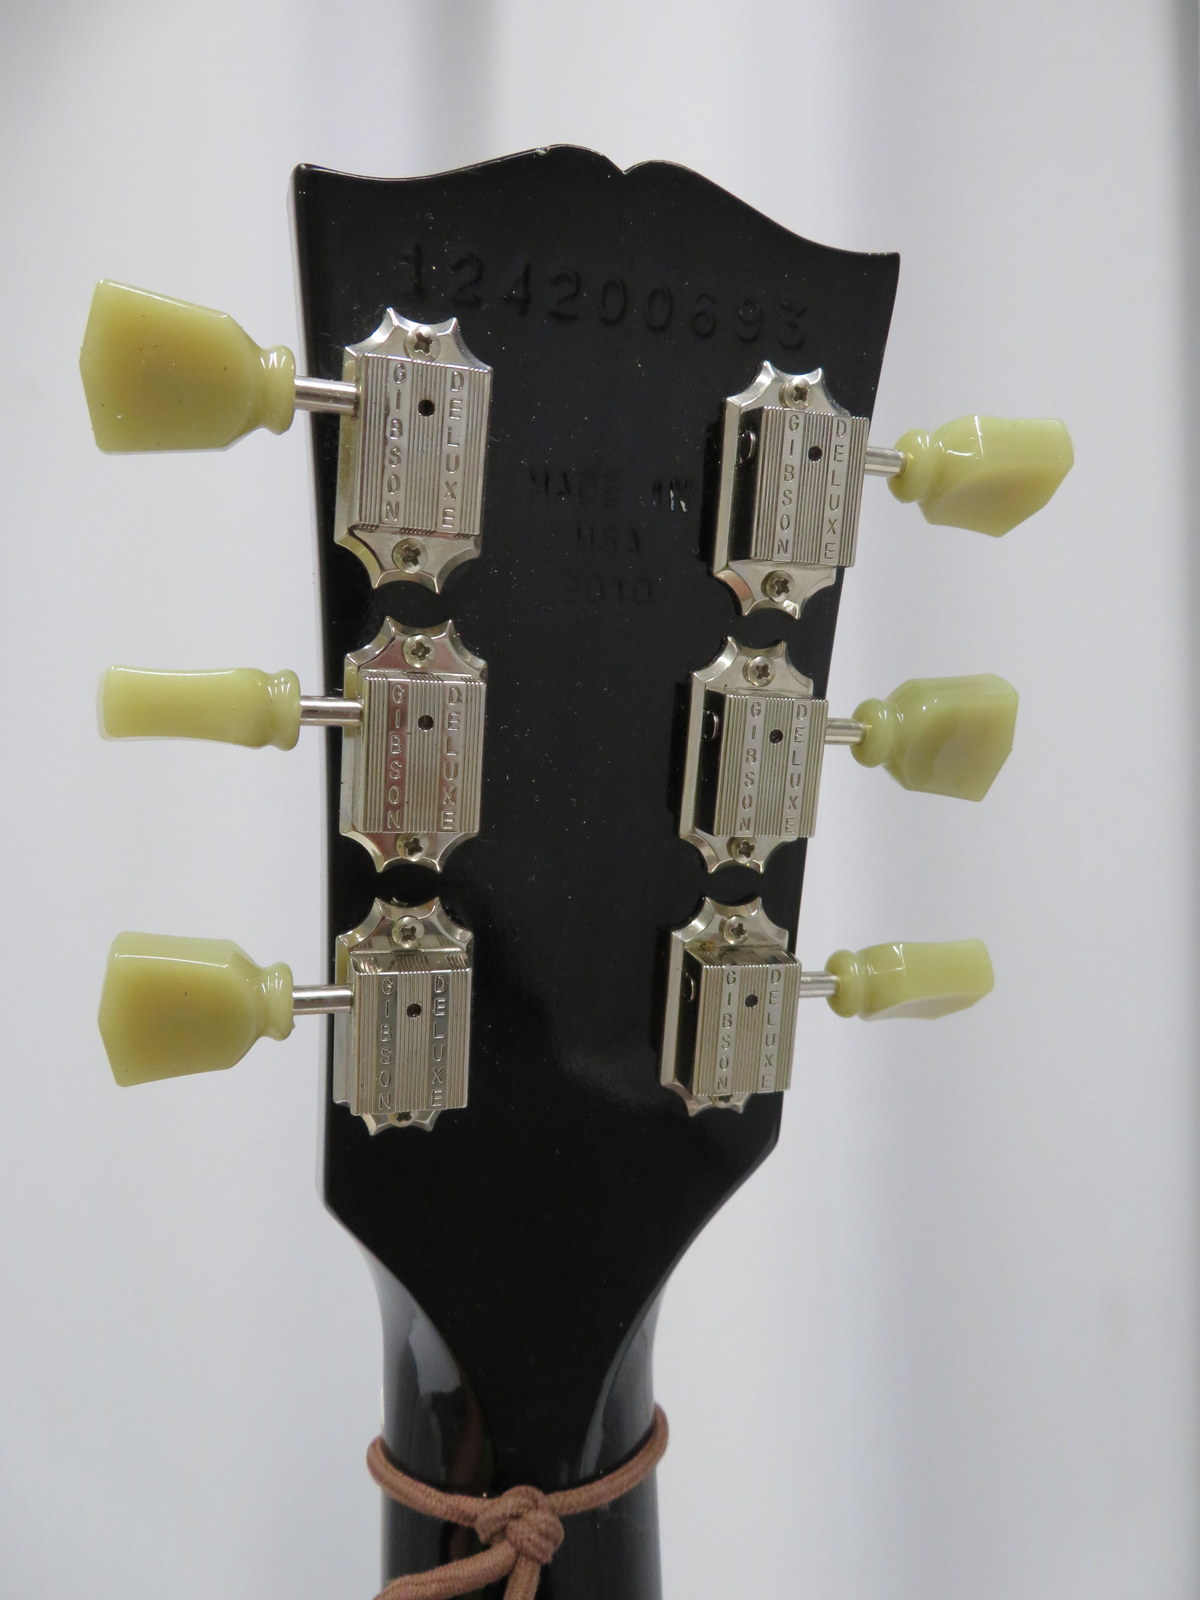 Gibson Les Paul electric guitar in flight case. Serial number: 124200693. - Image 9 of 13